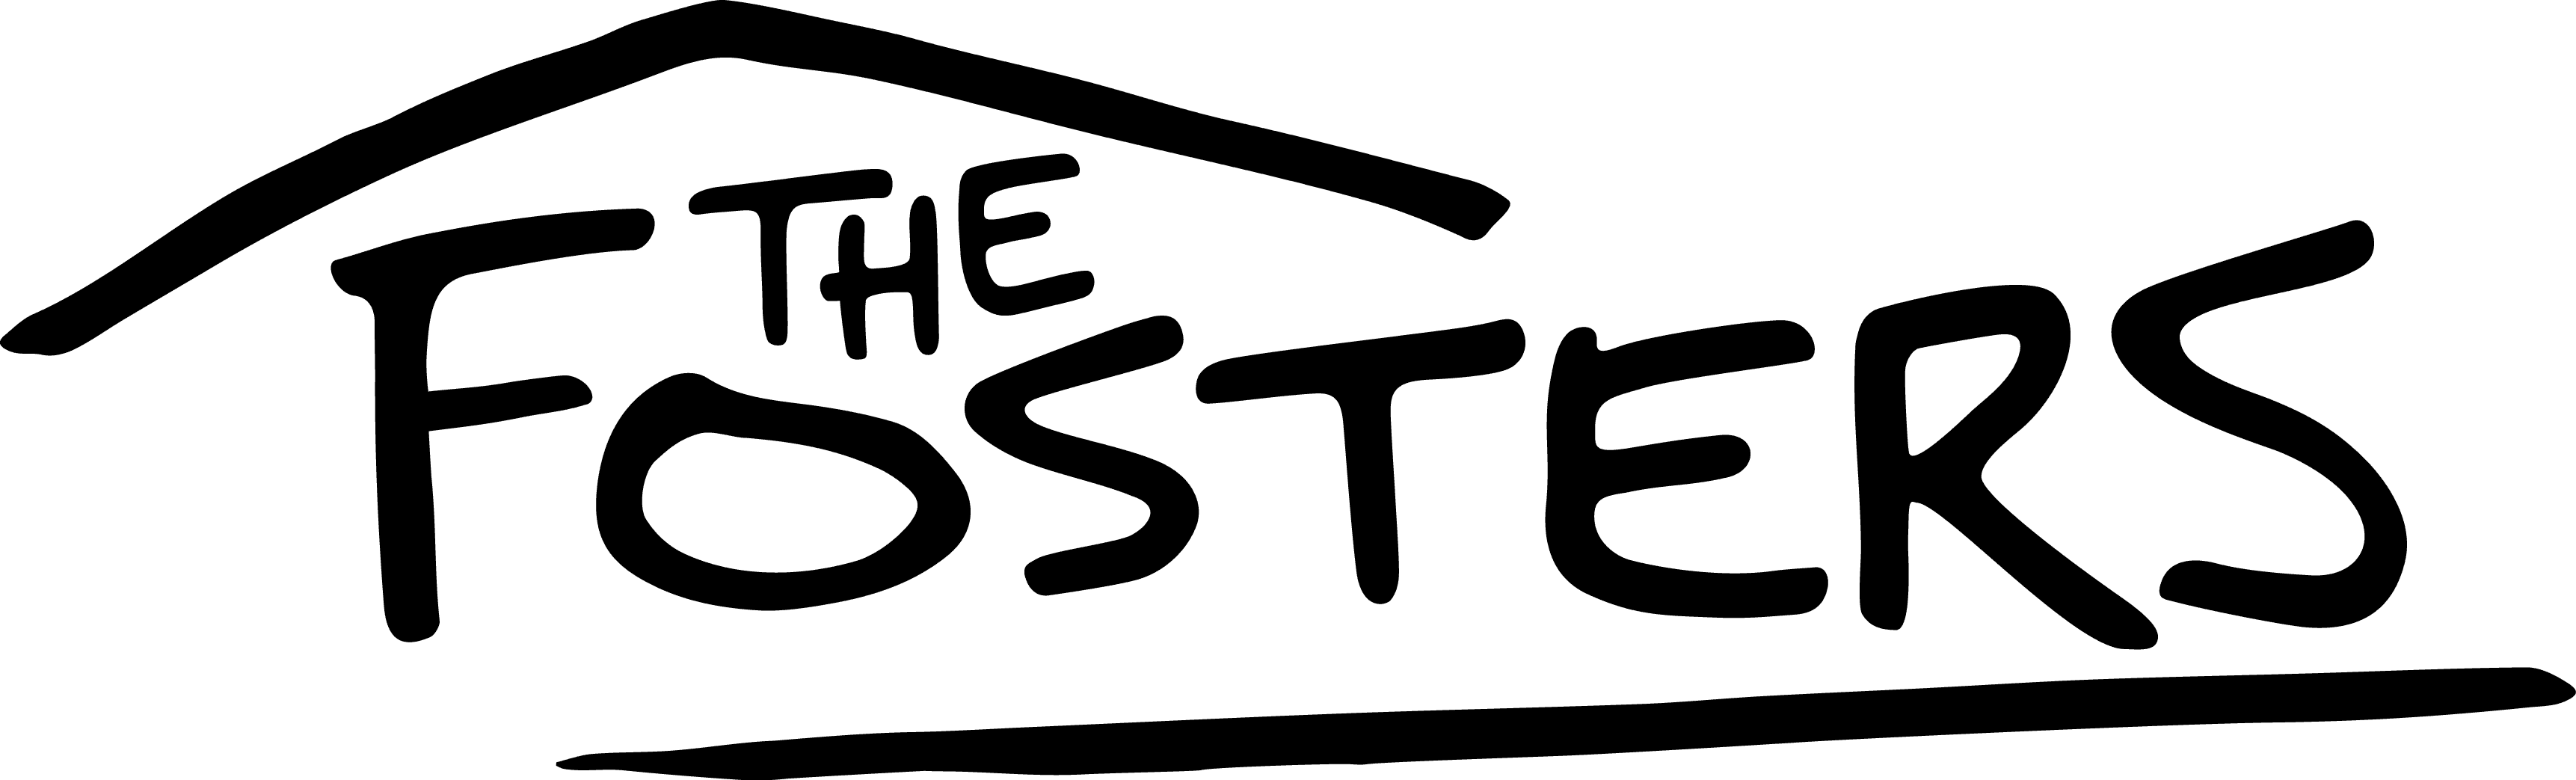 The Fosters logo